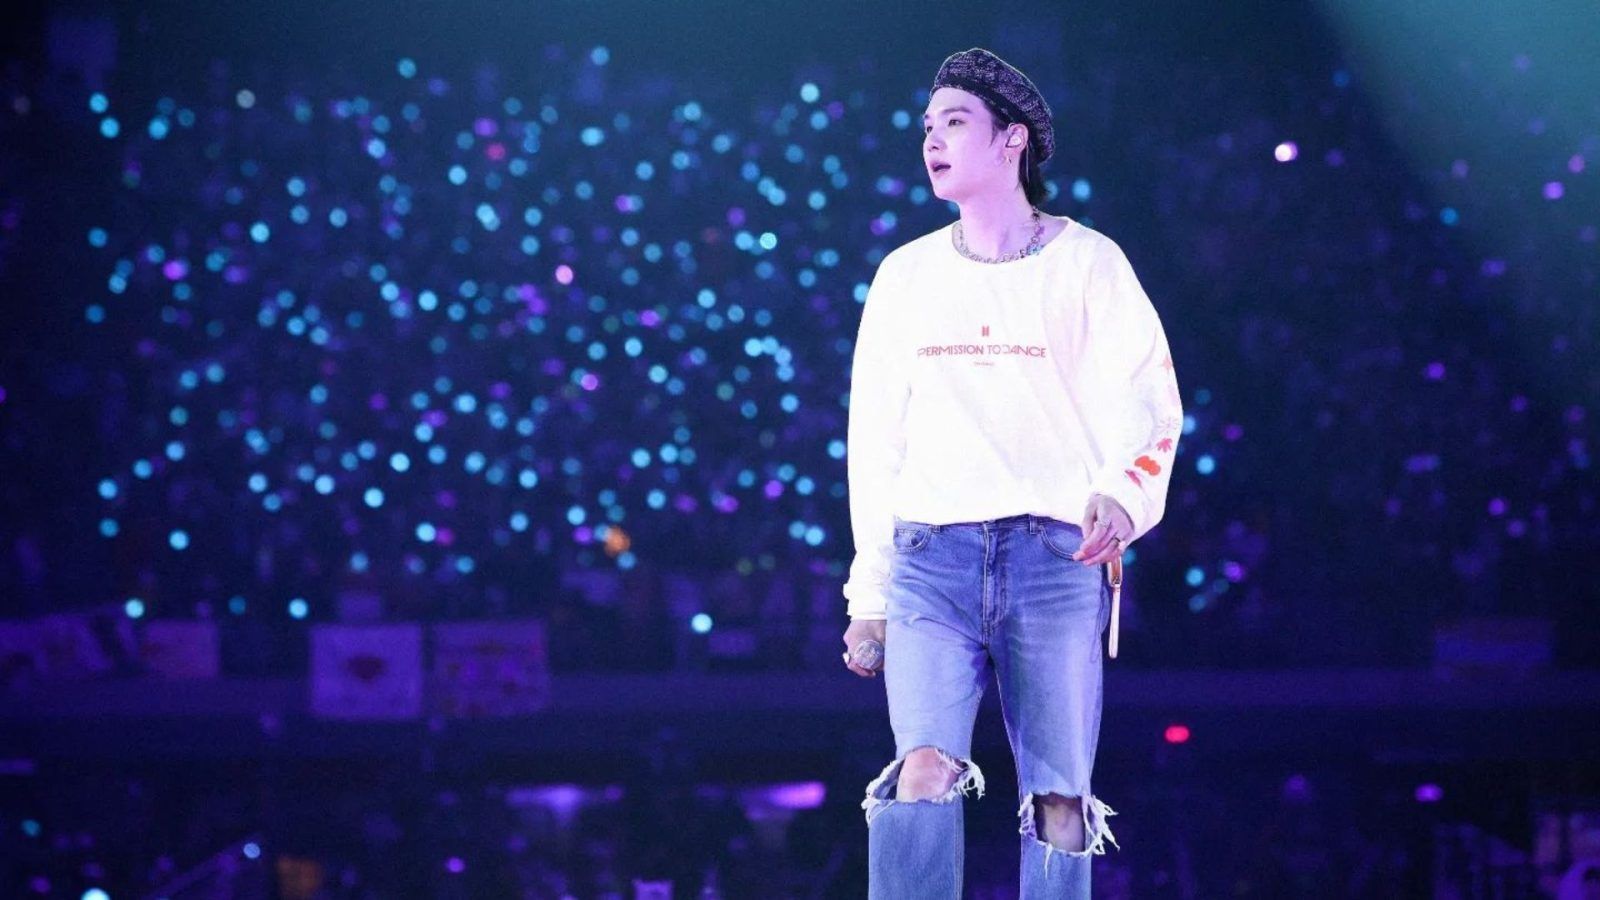 BTS' Suga announces his first solo world tour on Instagram